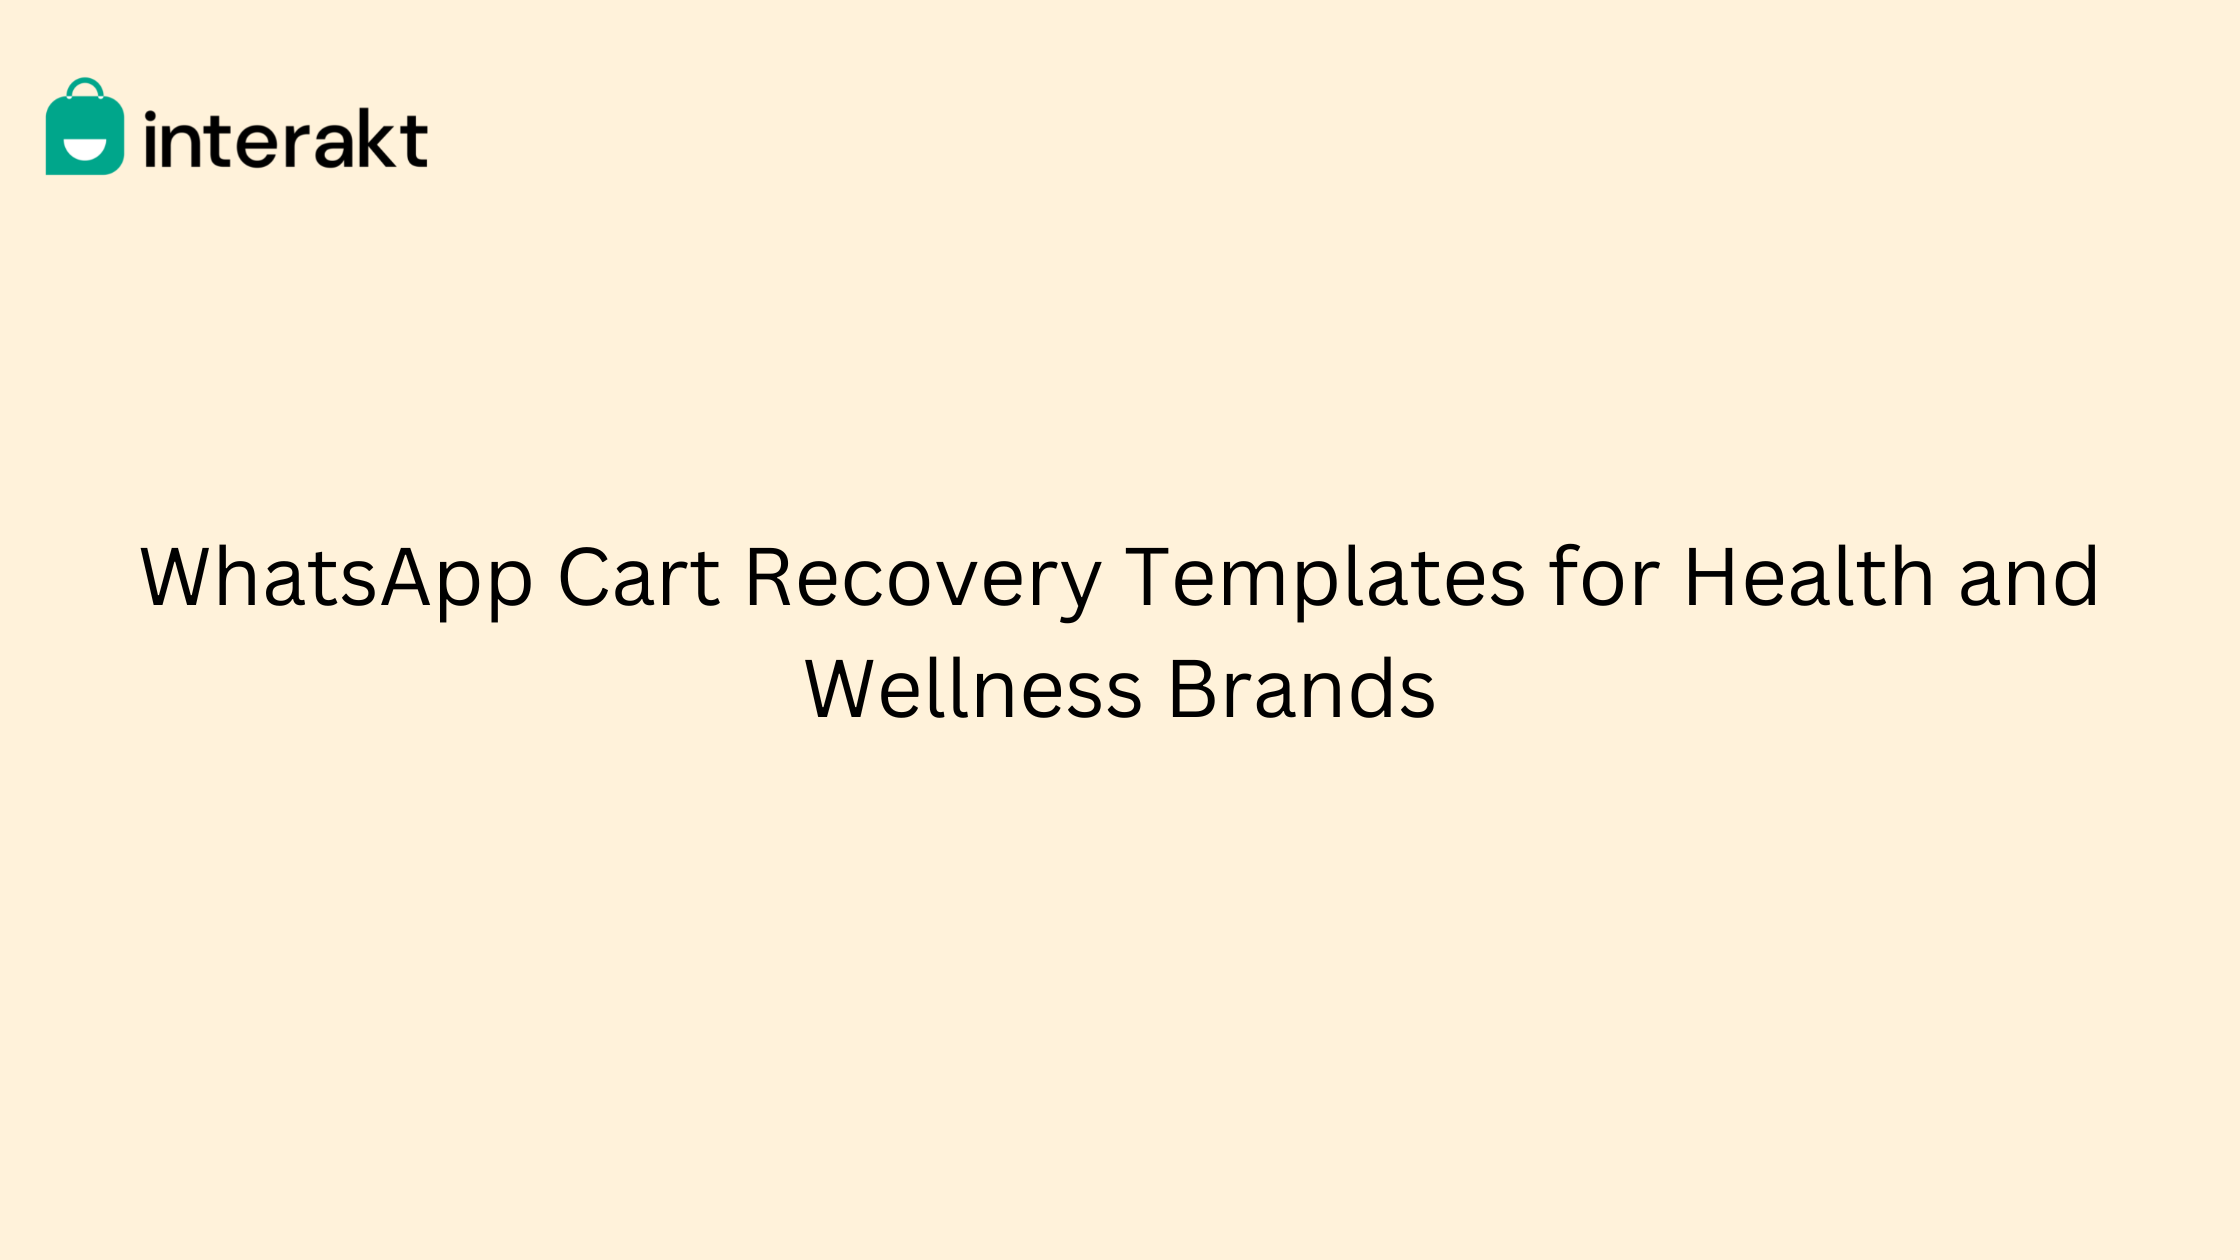 WhatsApp Cart Recovery Templates for Health and Wellness Brands